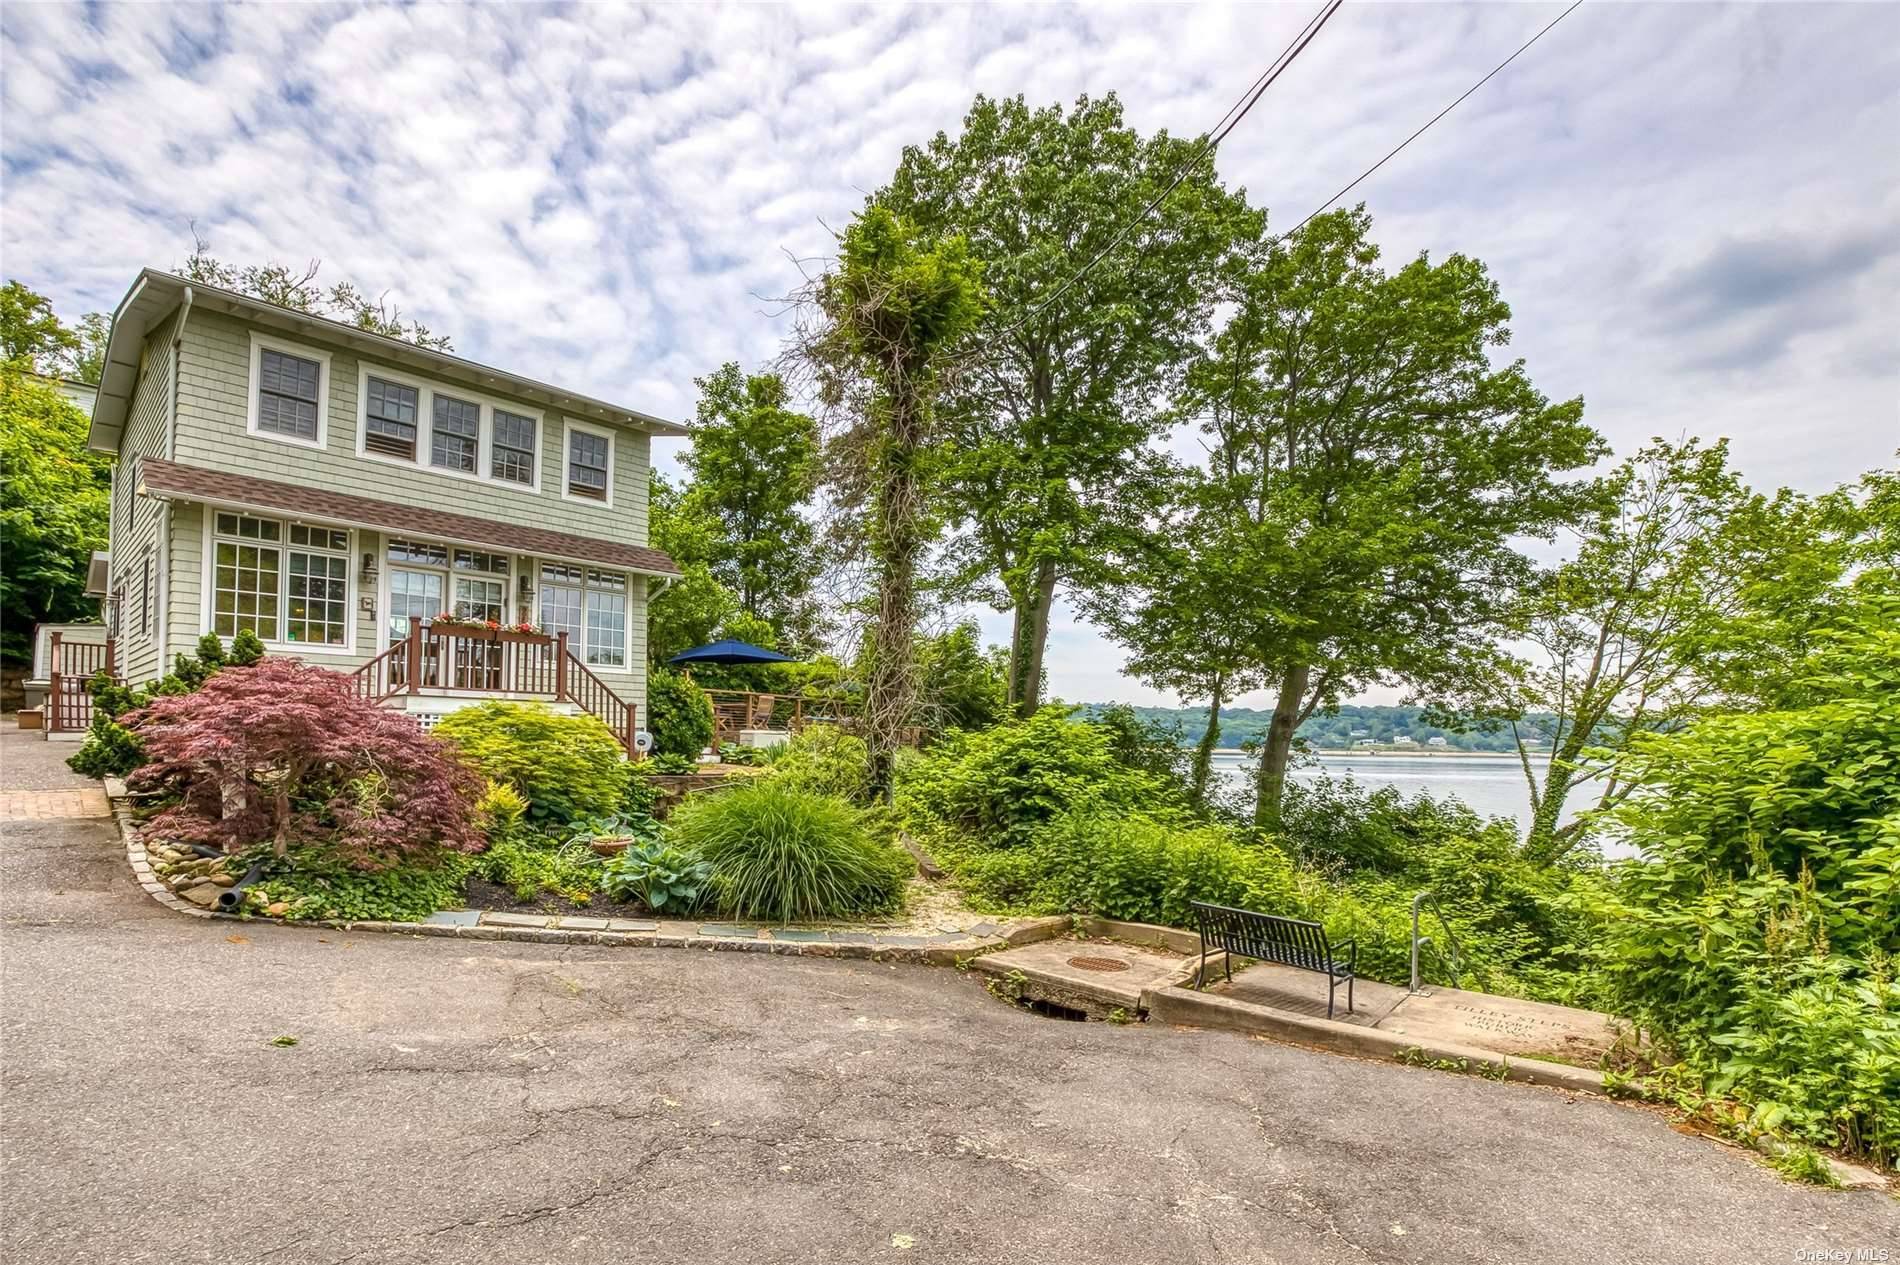 Fabulous Sun Filled Waterfront Home With Panoramic Water Views Of Sunrise amp ; Sunsets Across Long Island Sound w Easy Access To Sea Cliff Beach amp ; Boardwalk.